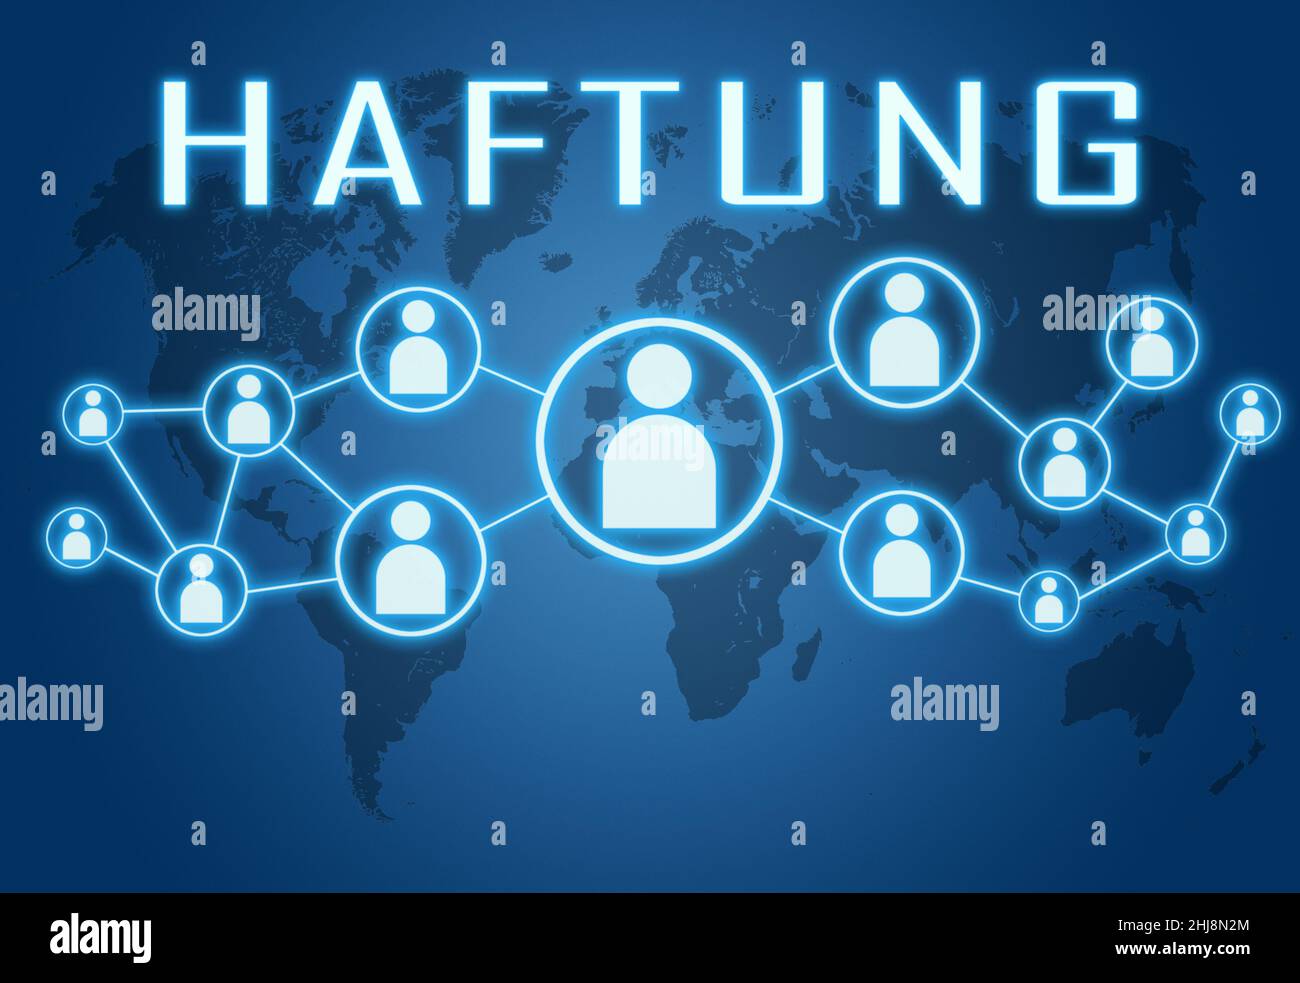 Haftung - german word for liability - text concept on blue background with world map and social icons. Stock Photo